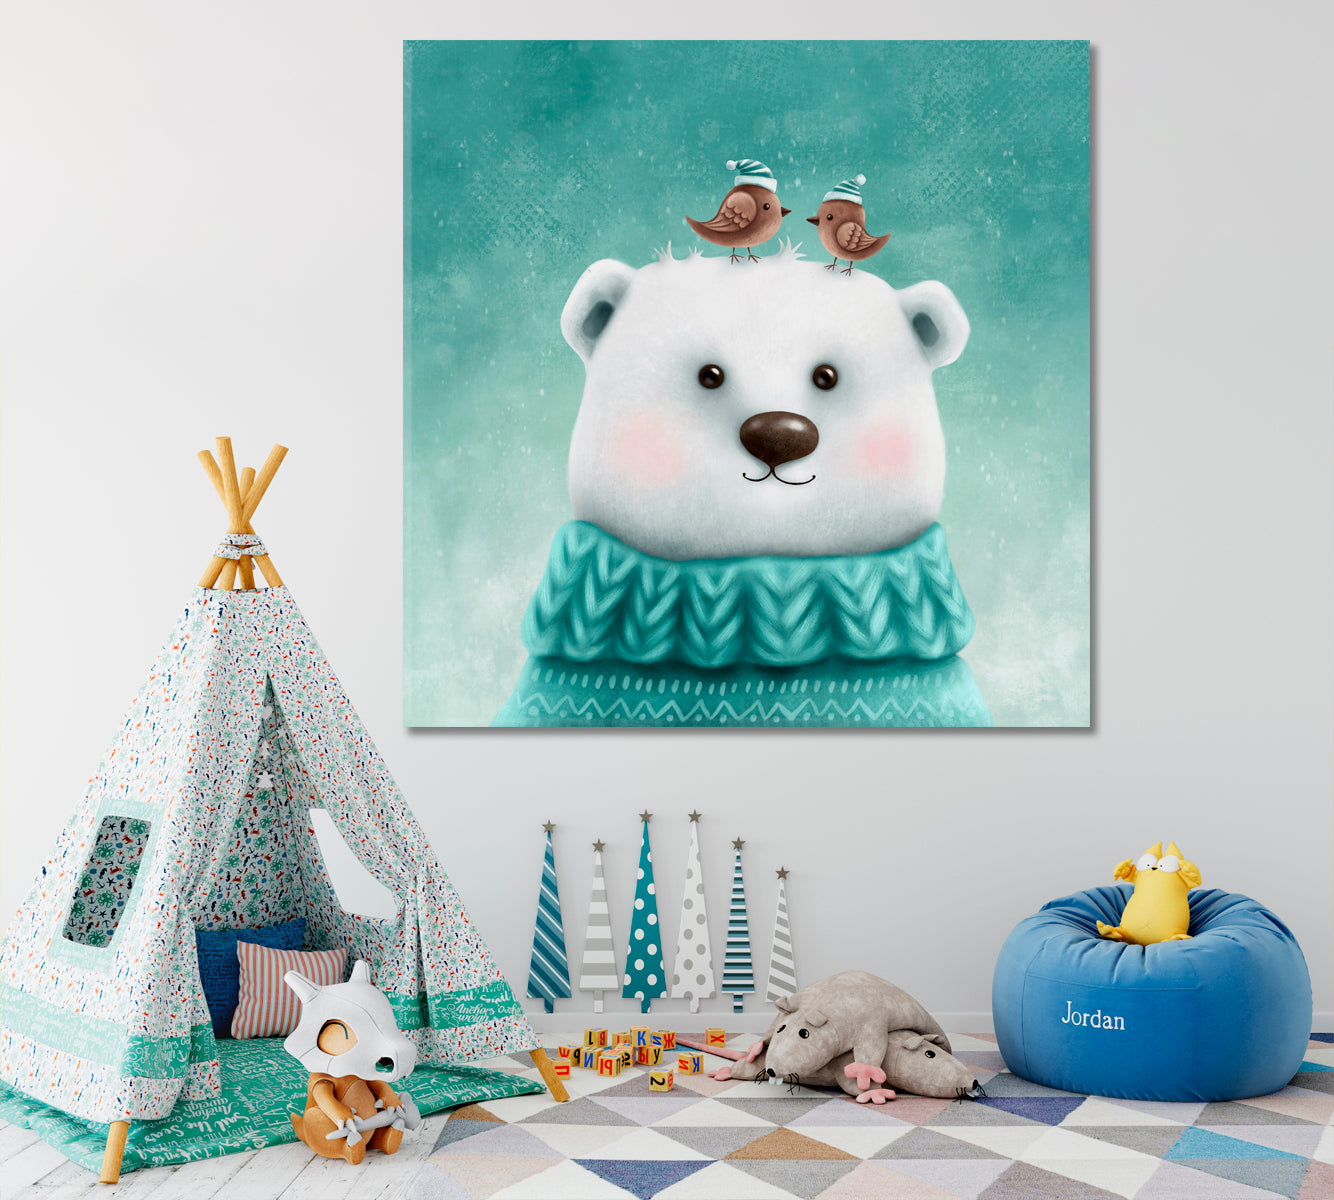 Little White Teddy Bear in a Sweater Canvas Print ArtLexy 1 Panel 12"x12" inches 